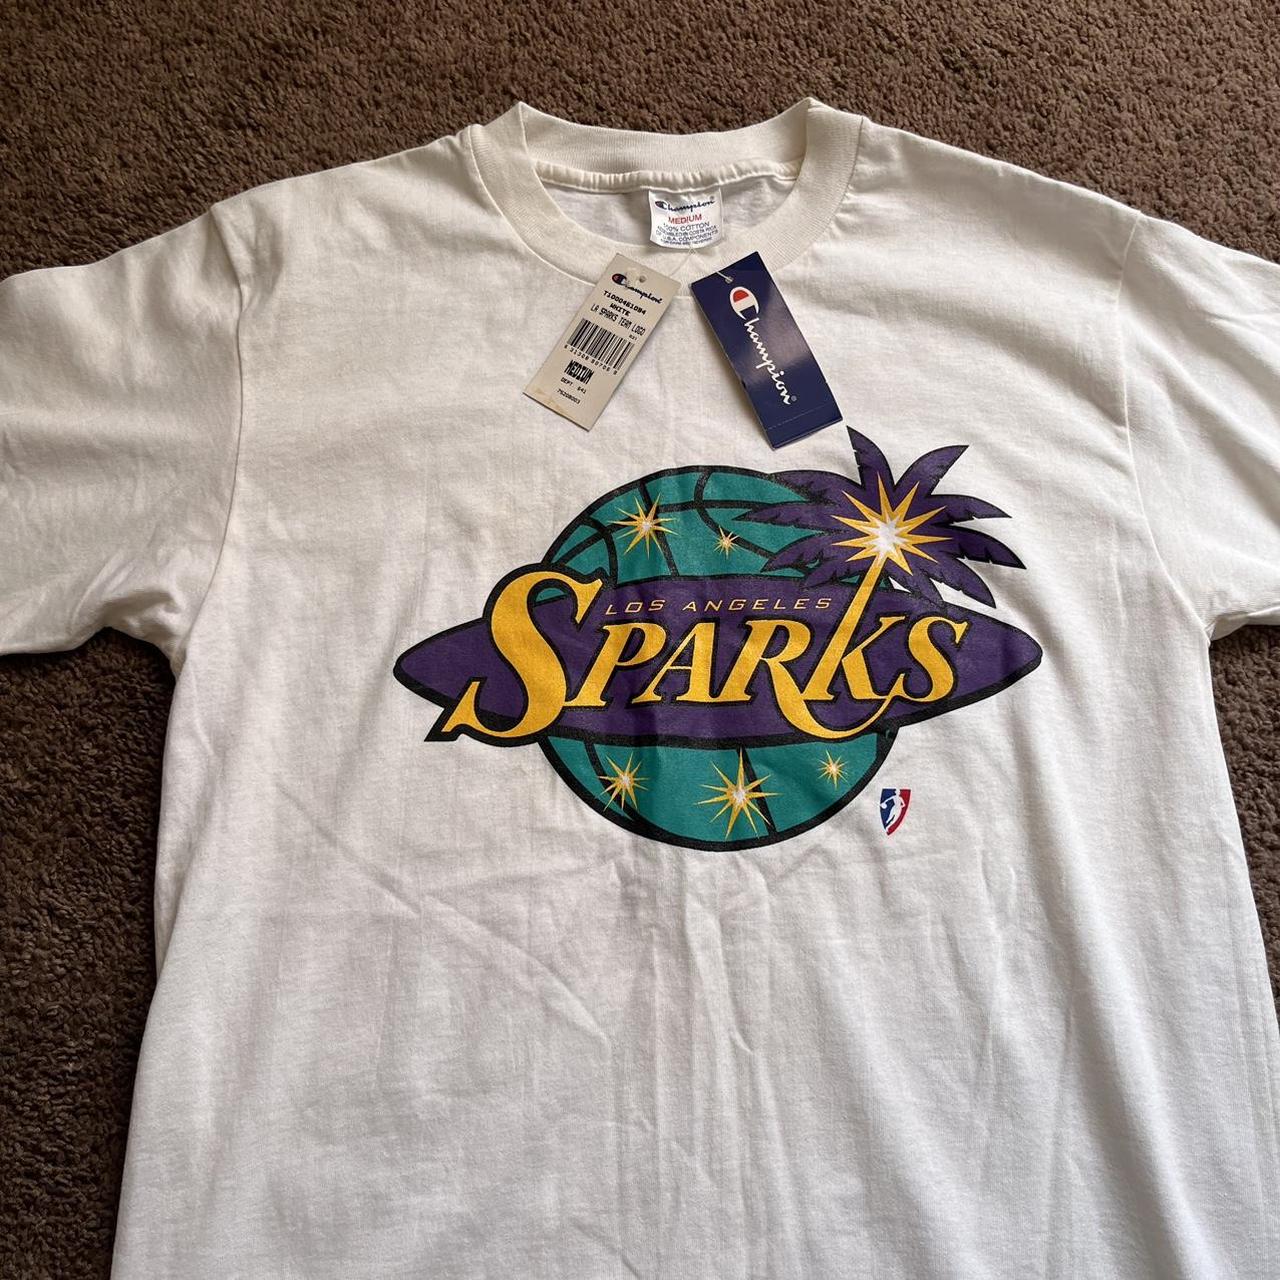 Bleach Dye Graphic T-shirt Small Los Angeles Sparks 